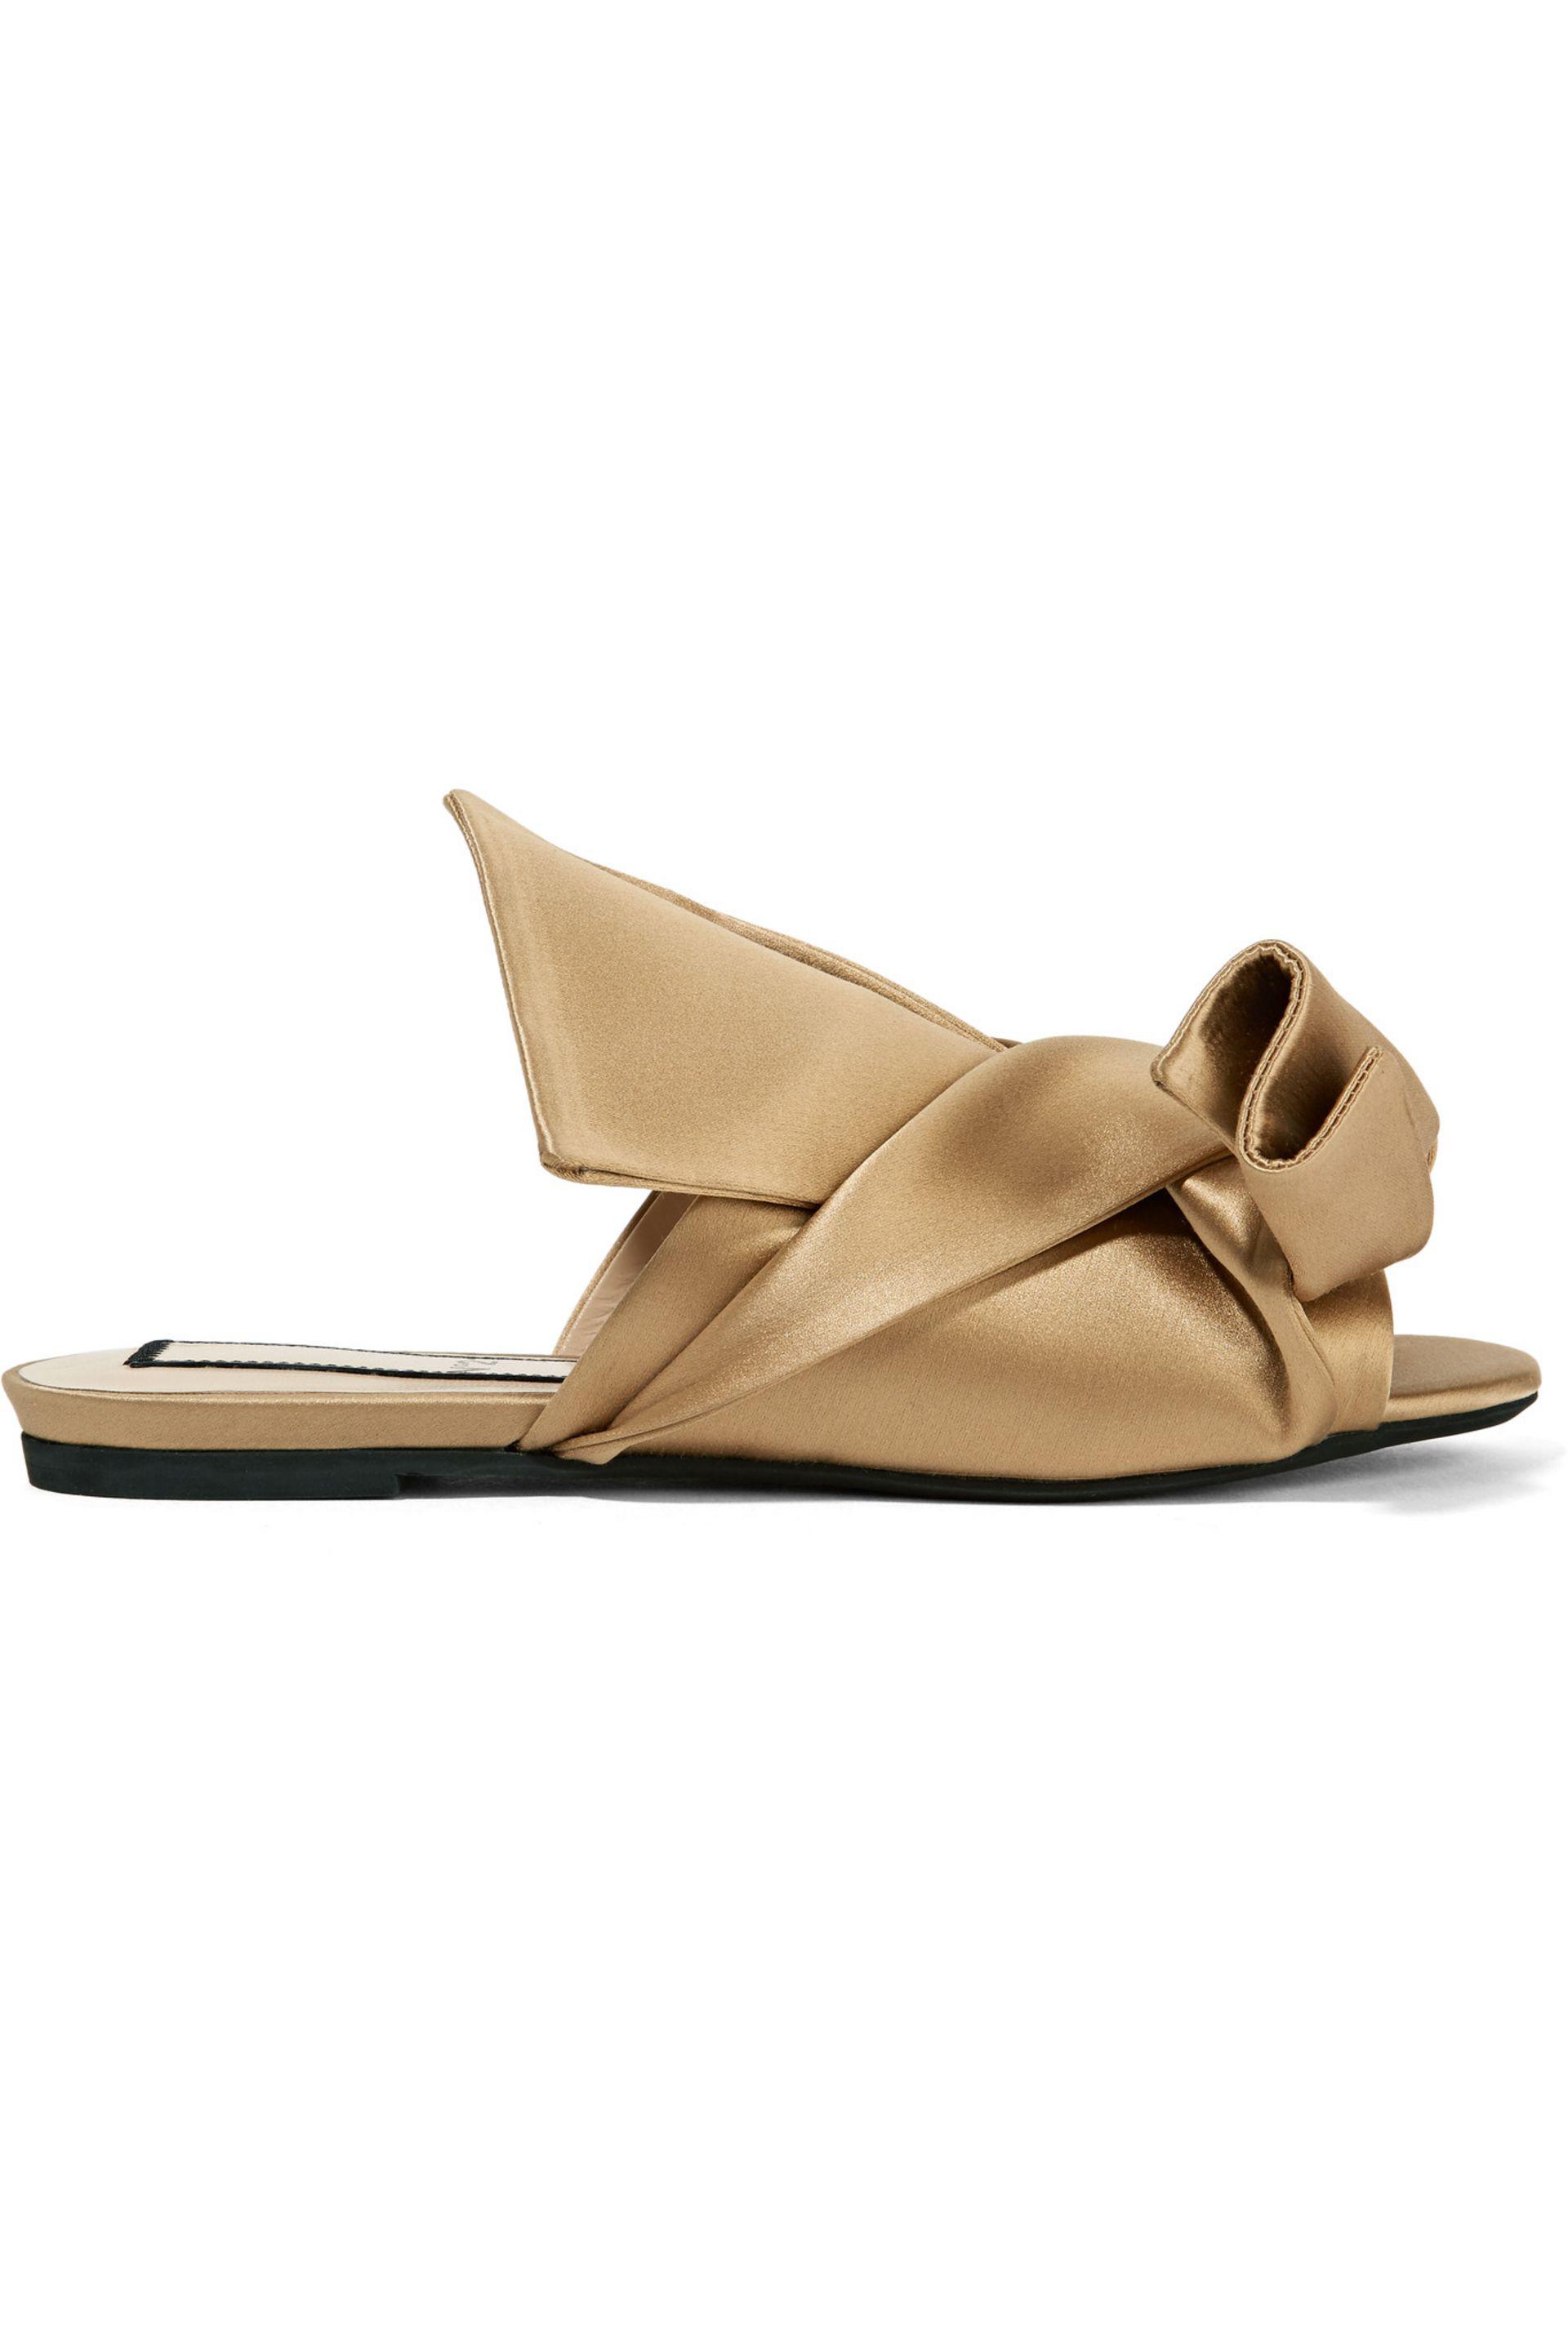 N 21 Knotted Satin Sandals  in Gold Metallic Lyst